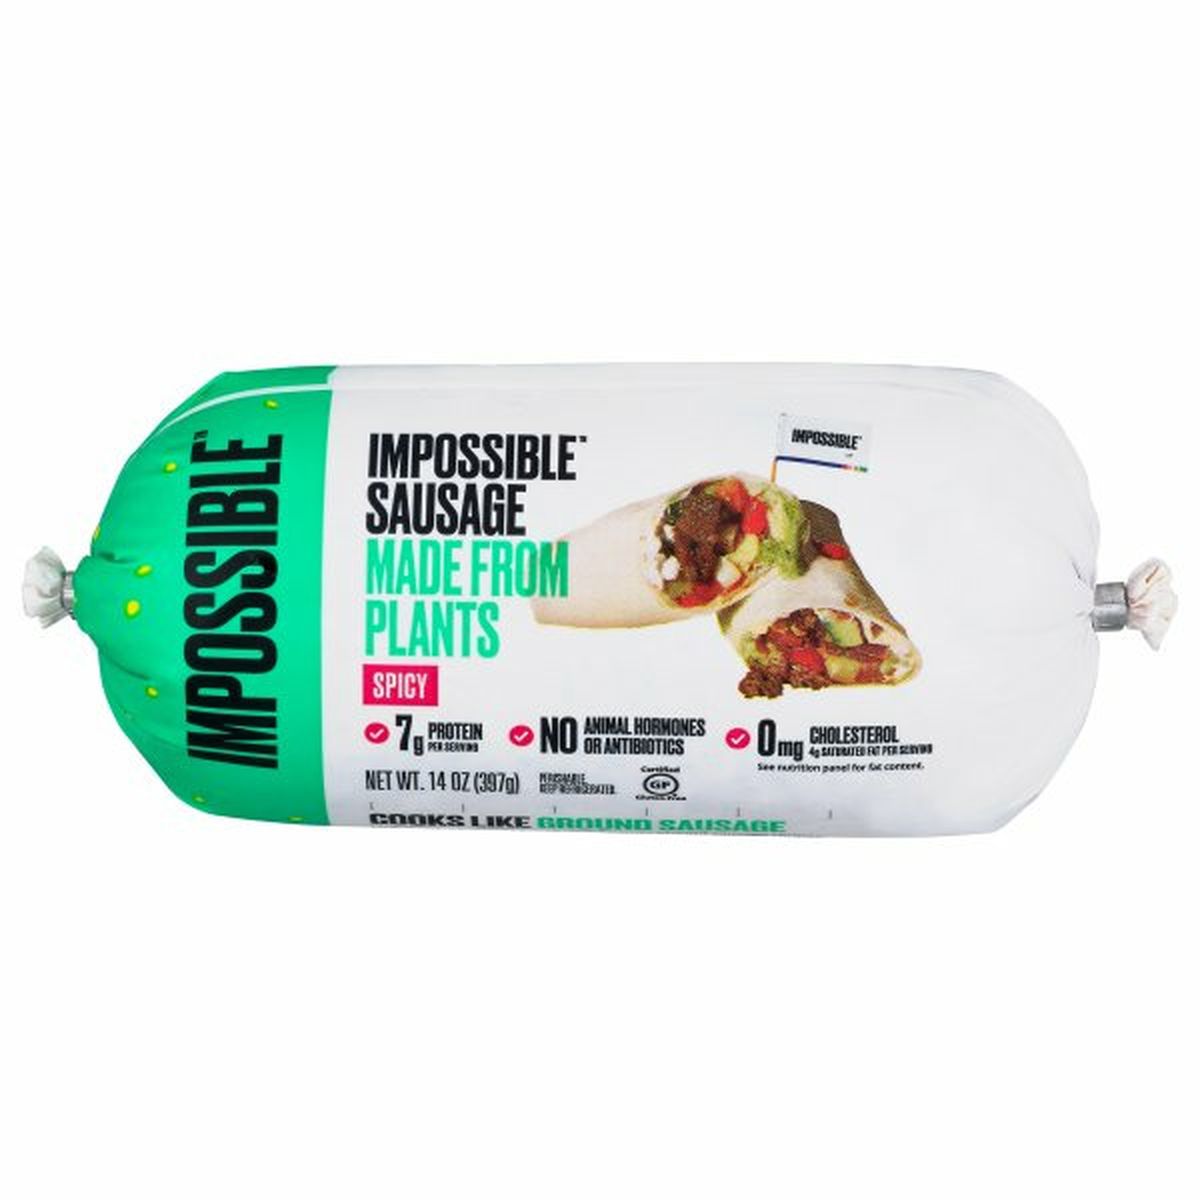 Calories in Impossible Foods Sausage, Spicy, Ground